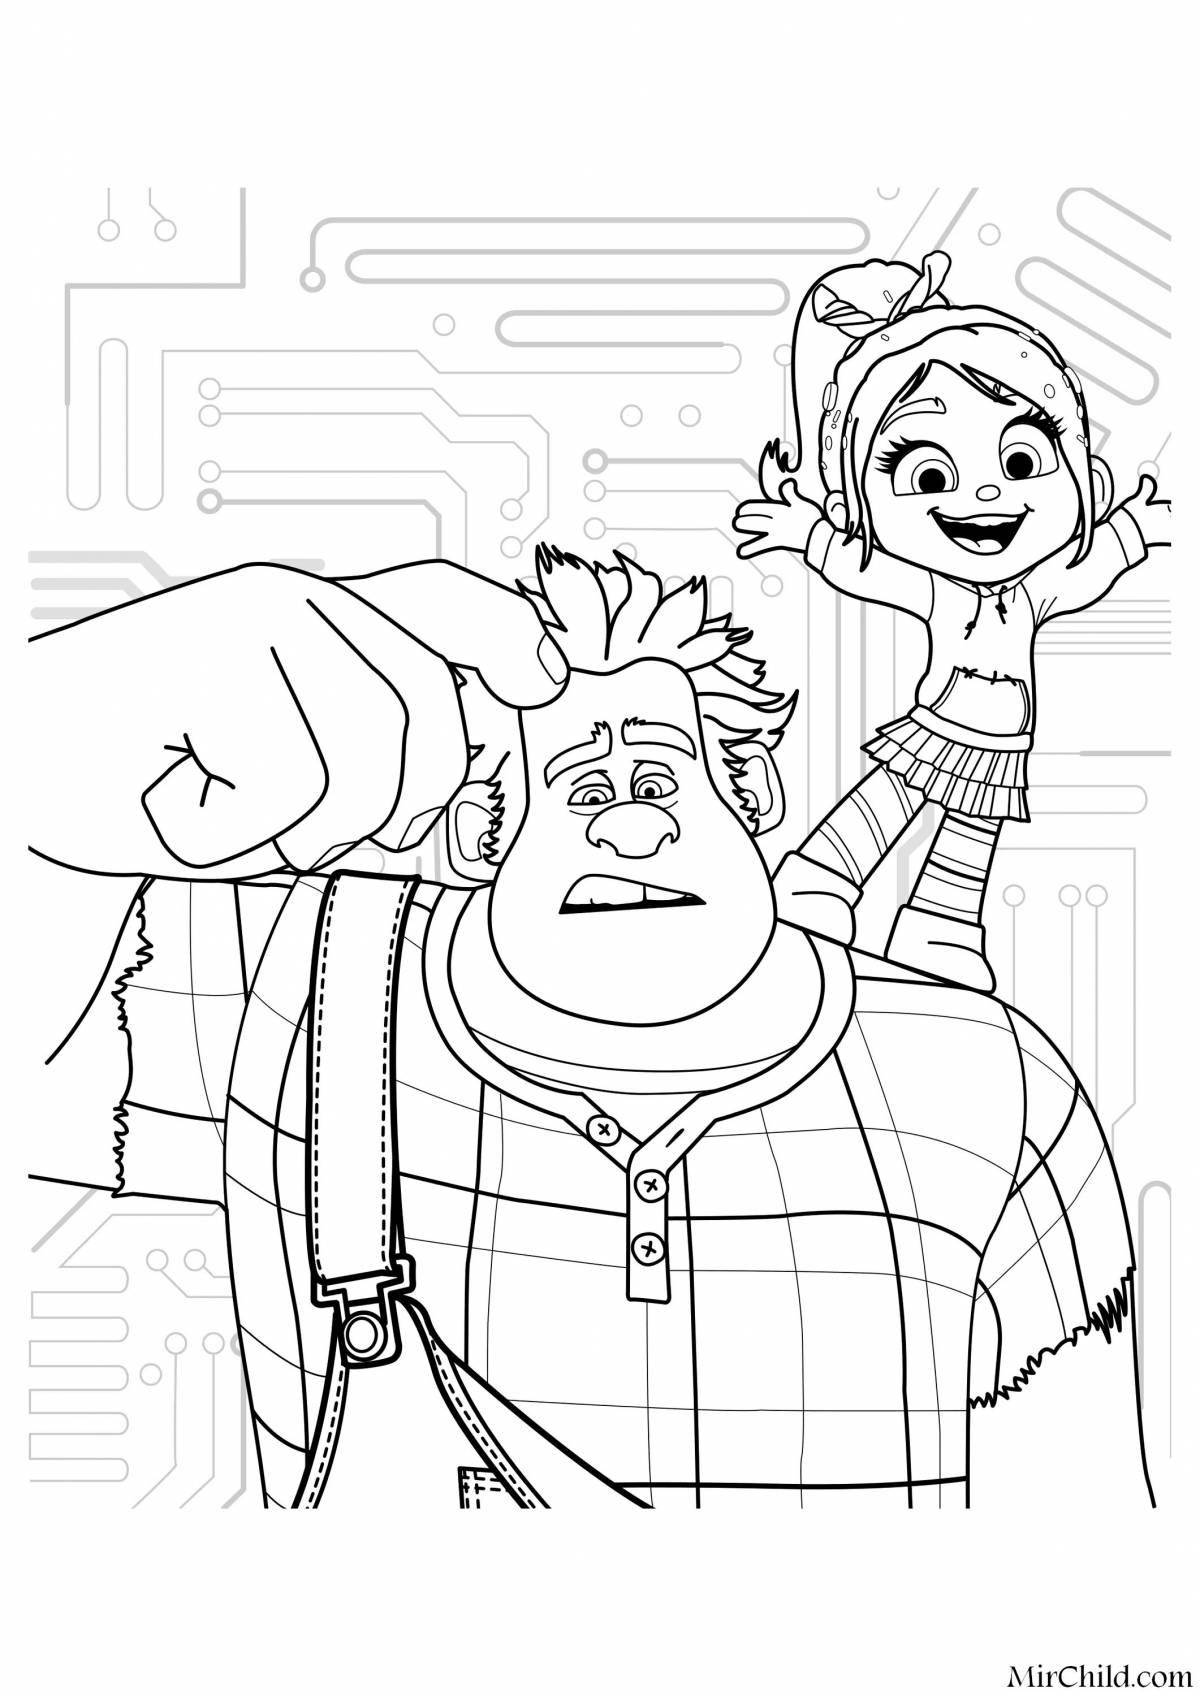 Vanellope and ralph awesome coloring book